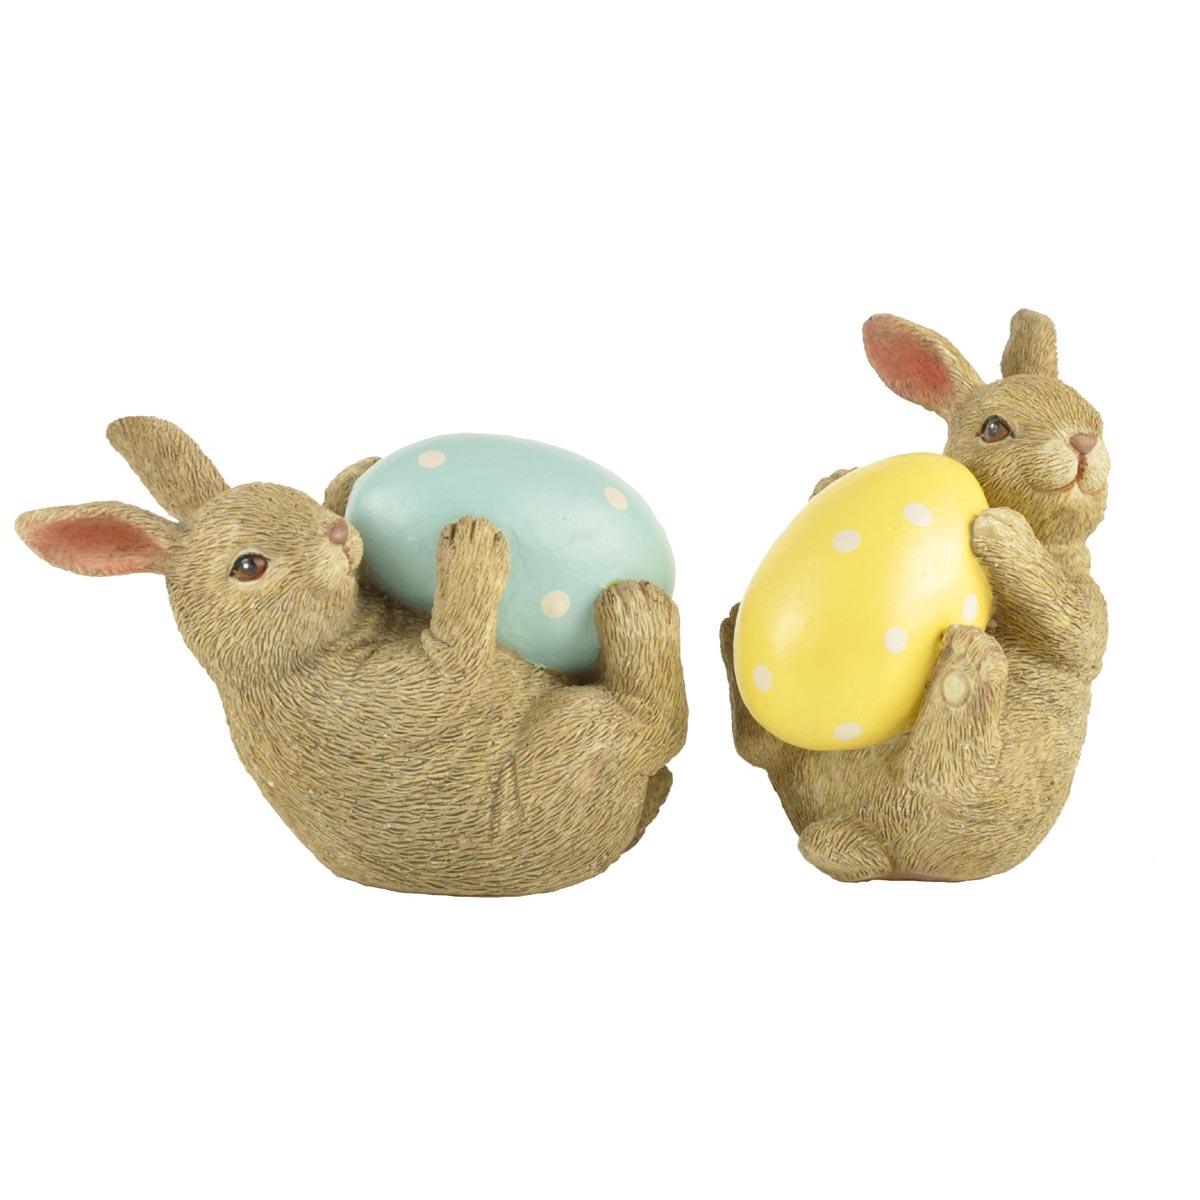 Low MOQ Decoration Resin Easter Gift Brown Rabbit Figurine with Eggs